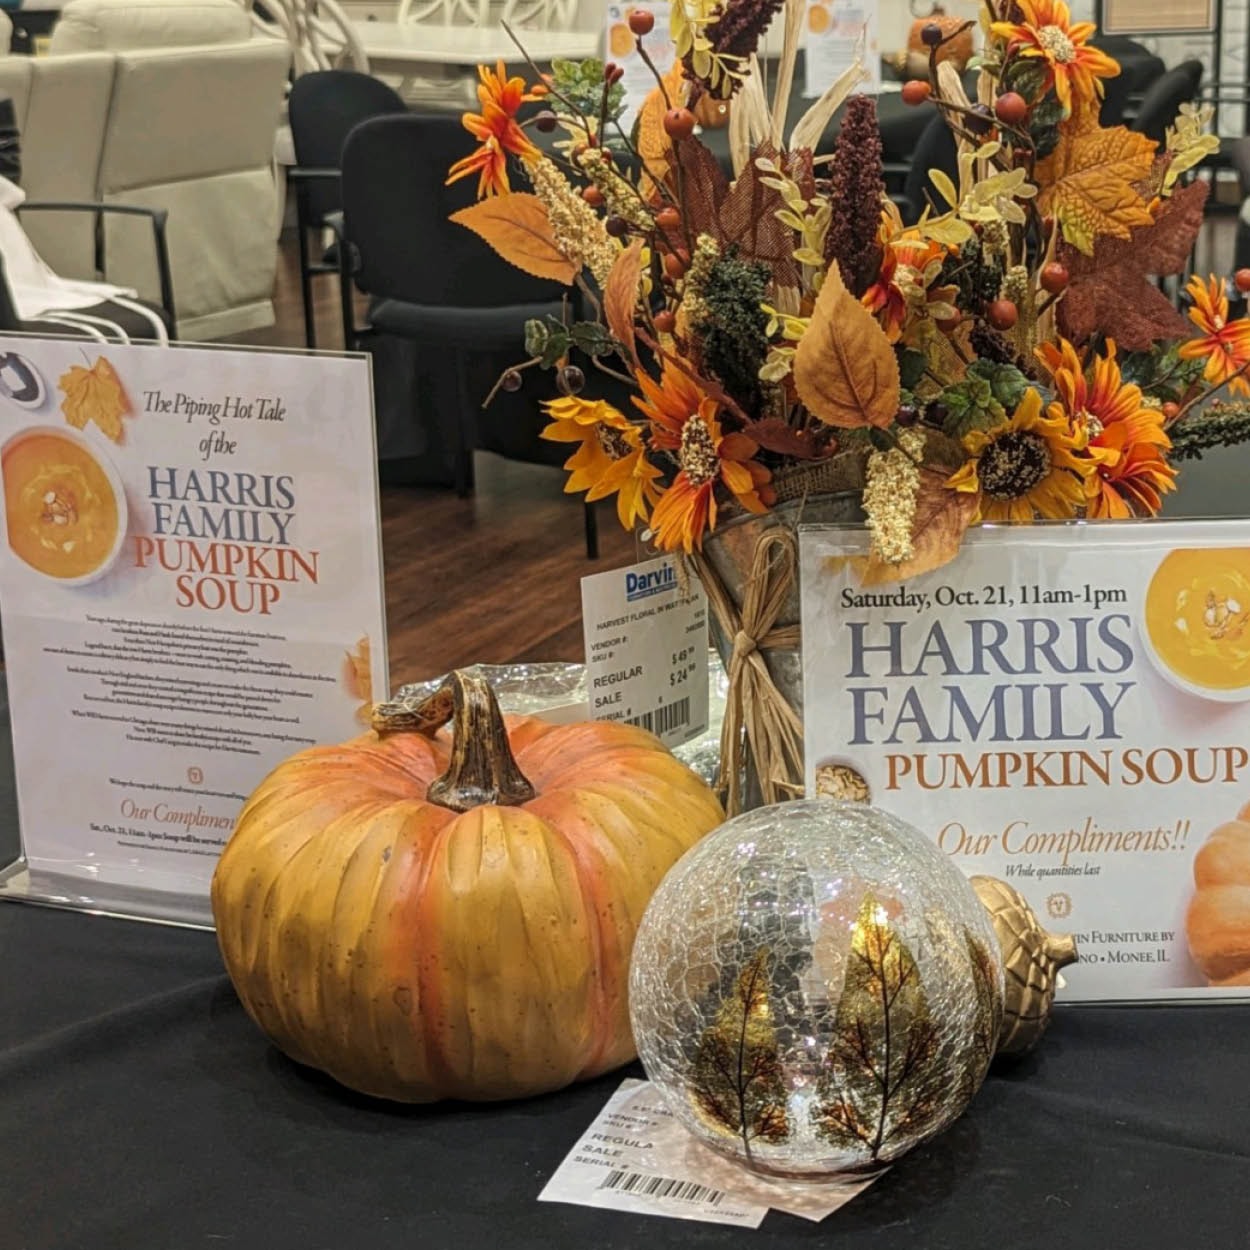 Oct 2023 - Darvin customers were invited to enjoy a little Fall Culinary Treat when Darvin Furniture & Mattress President Will Harris shared some of his family's special recipe for Pumpkin Soup